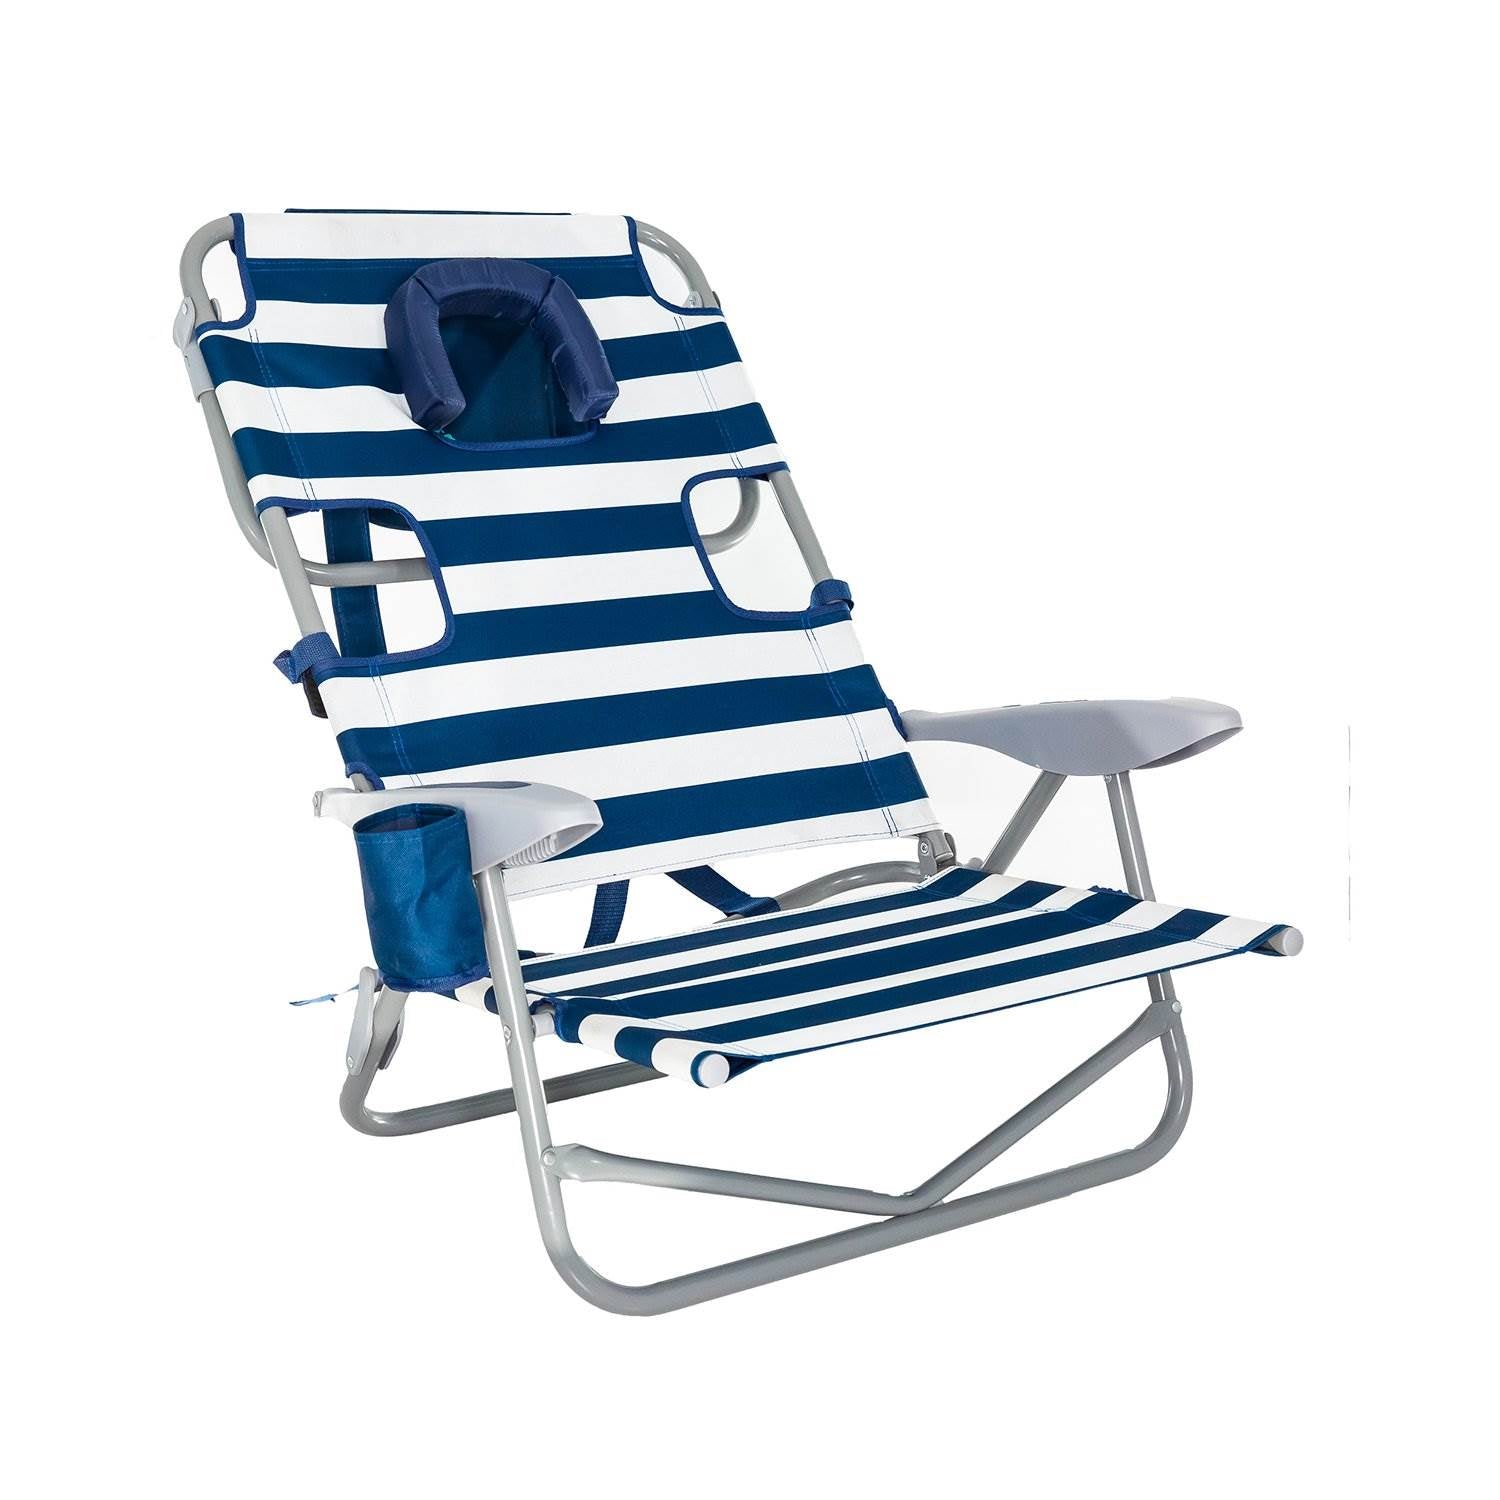 Ostrich-On-Your-Back-Outdoor-Reclining-Beach-Pool-Camping-Chair,-Blue-Stripe-Chairs-&-Seating